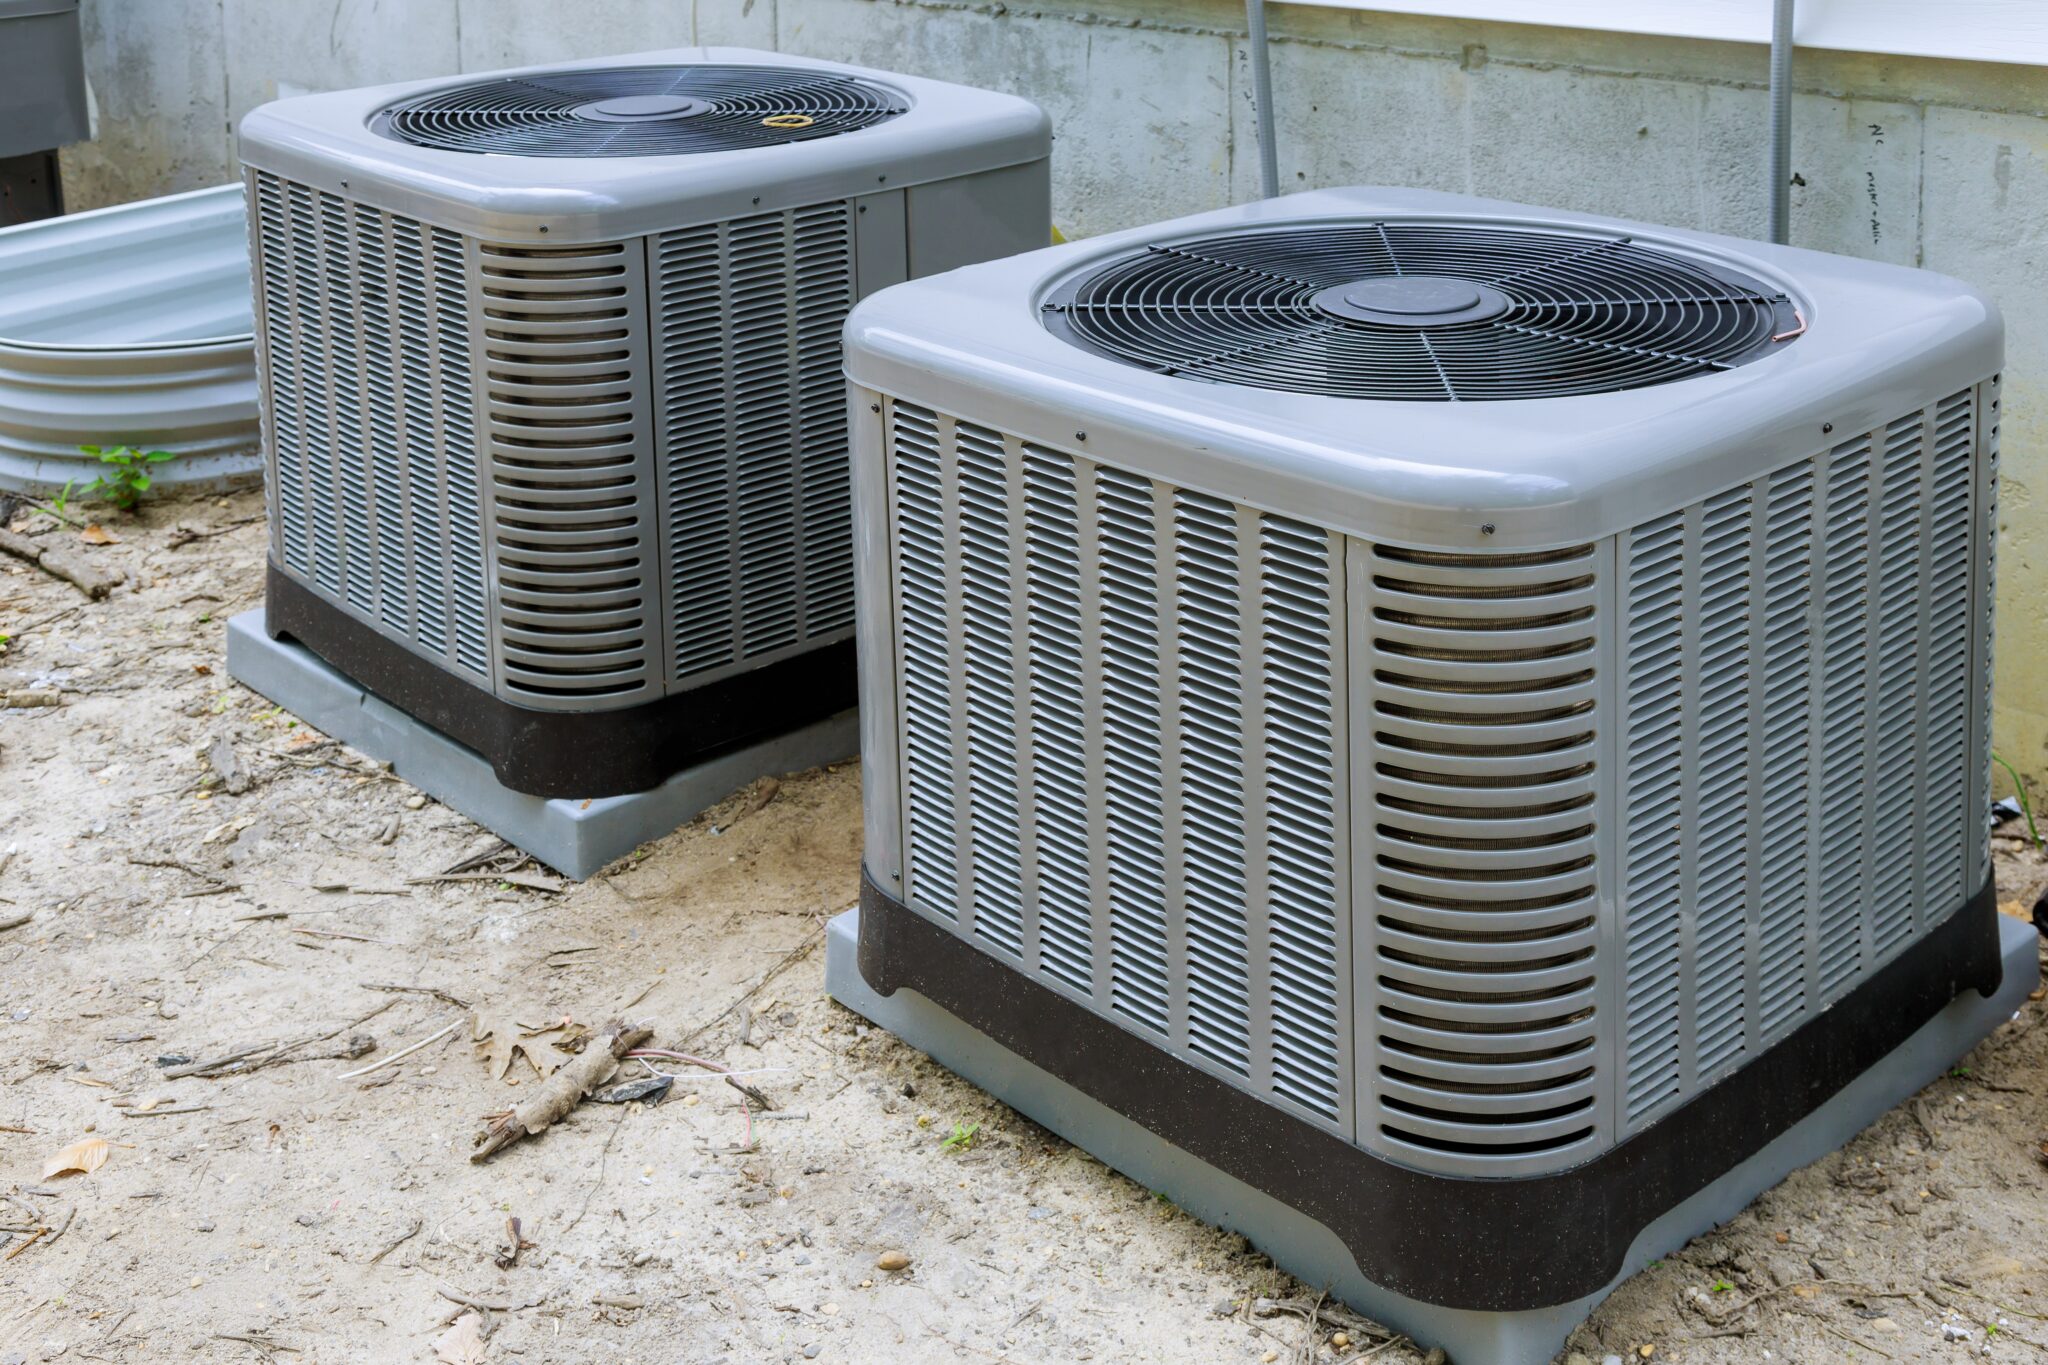 Why does my AC unit need a coil cleaning?